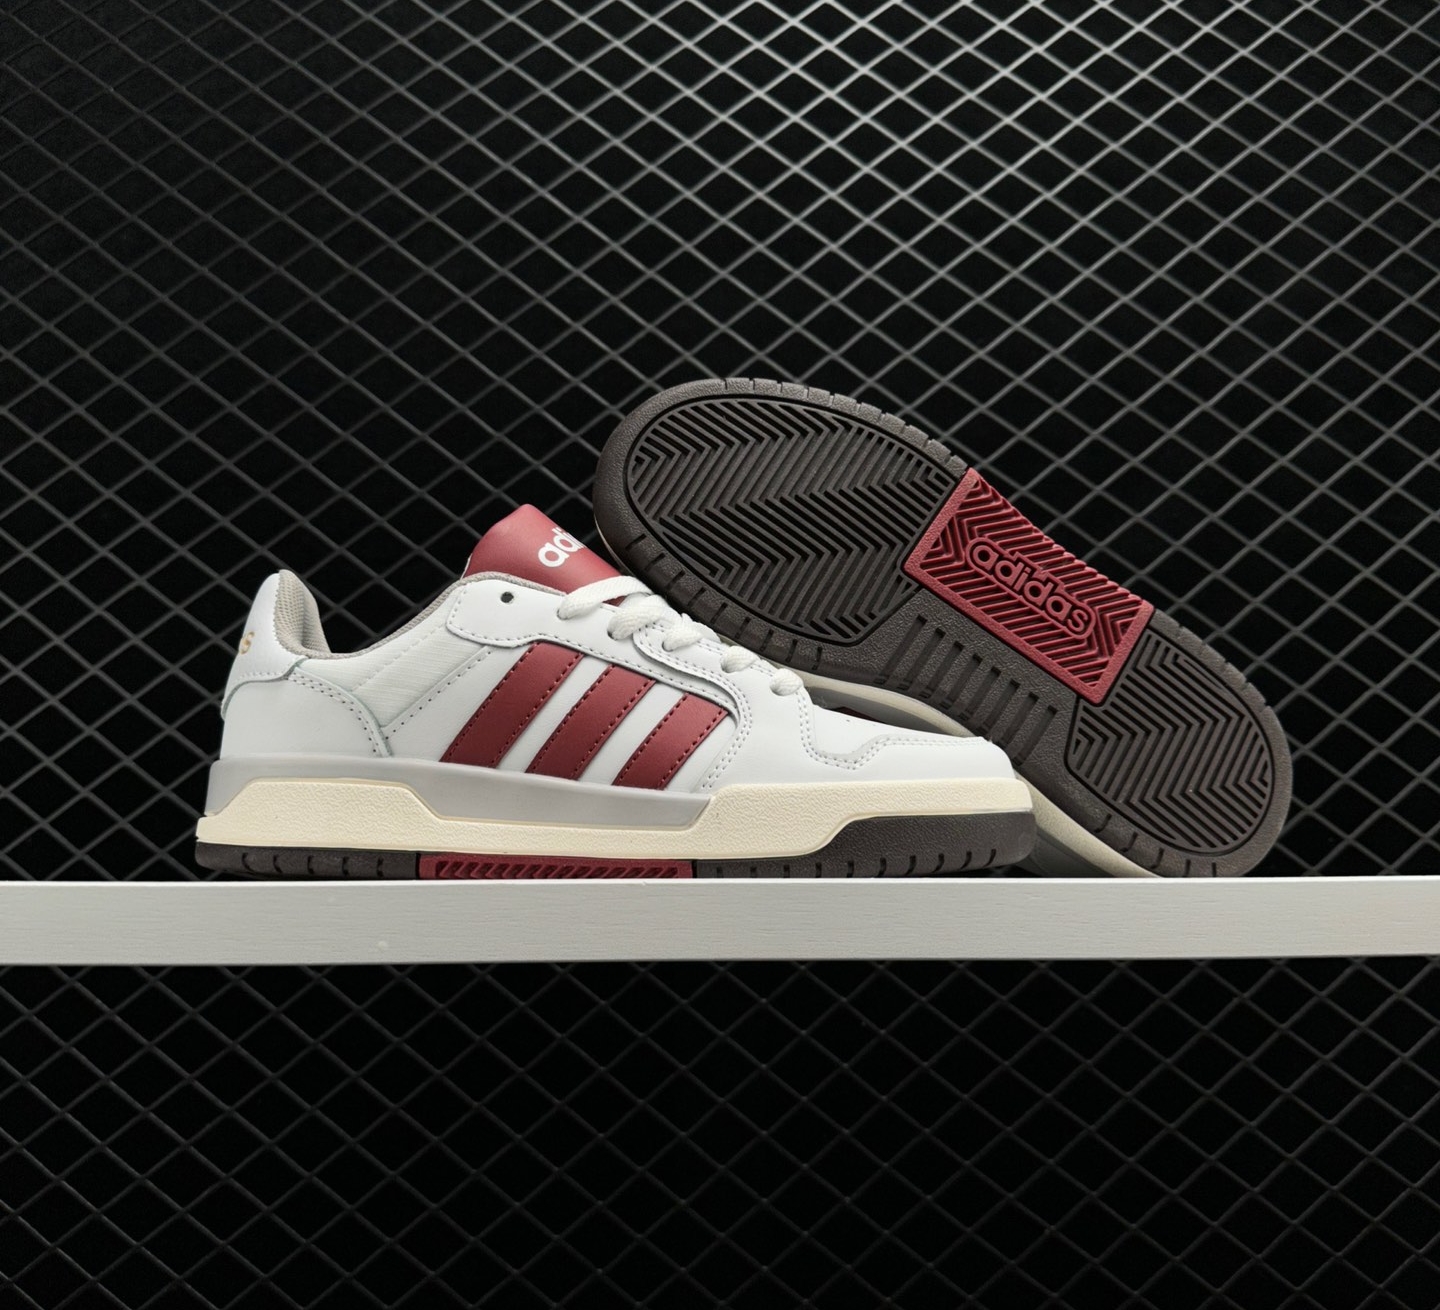 Adidas Neo Entrap White Red FW3462 - Stylish Sneakers with a Pop of Red